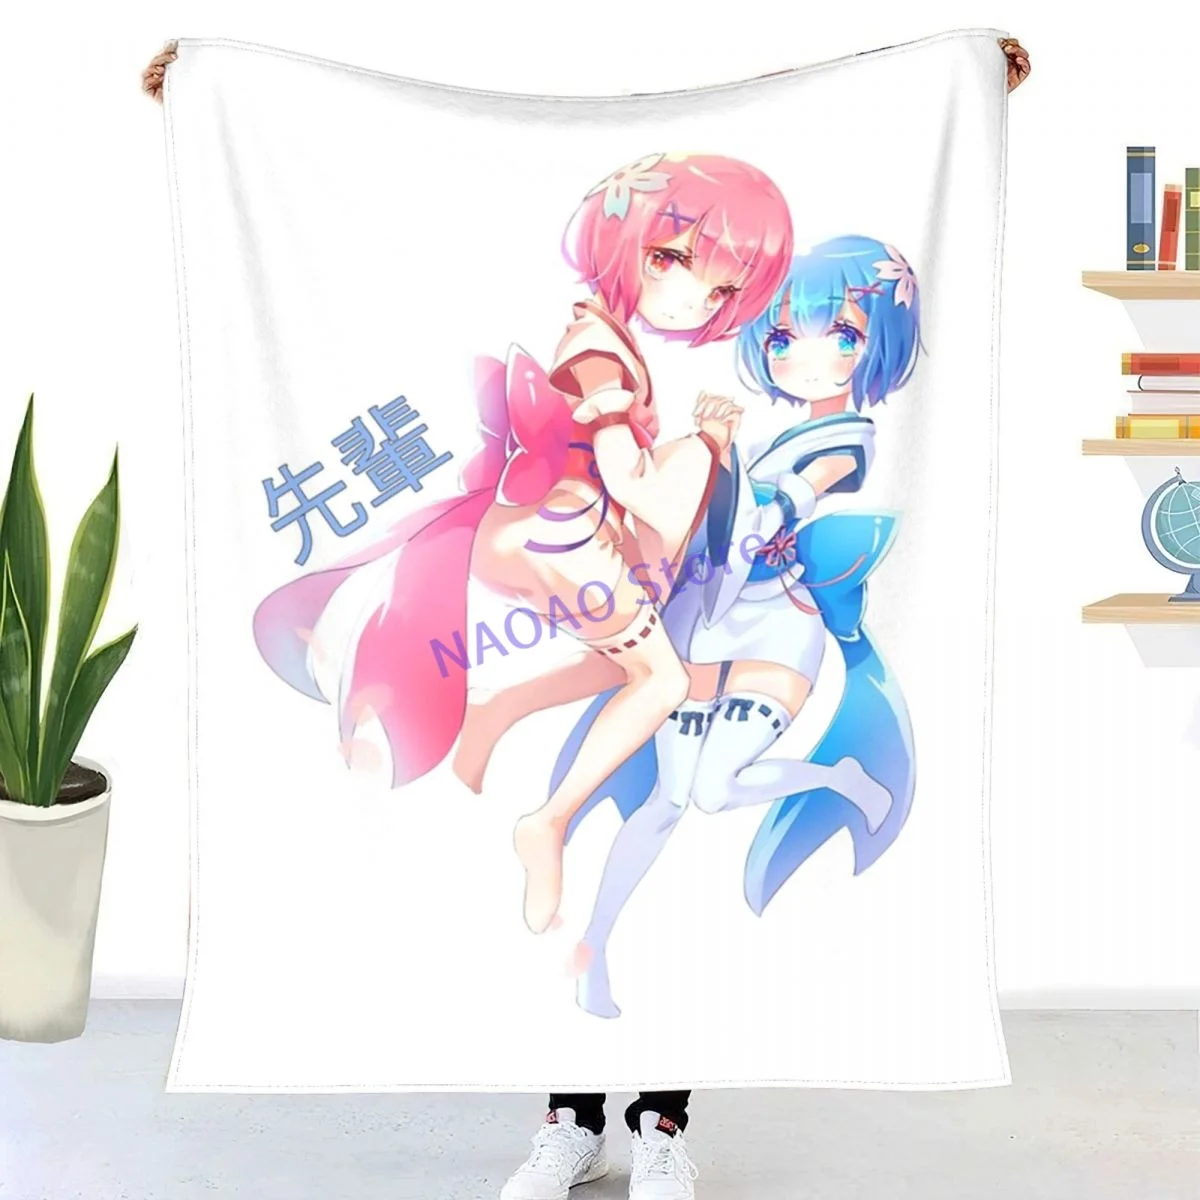 

Loli Ram And Rem Kawaii Re Zero Throw Blanket Sheets On The Bed, Blanket On The Sofa, Decorative Lattice Bedspreads, Sofa Covers